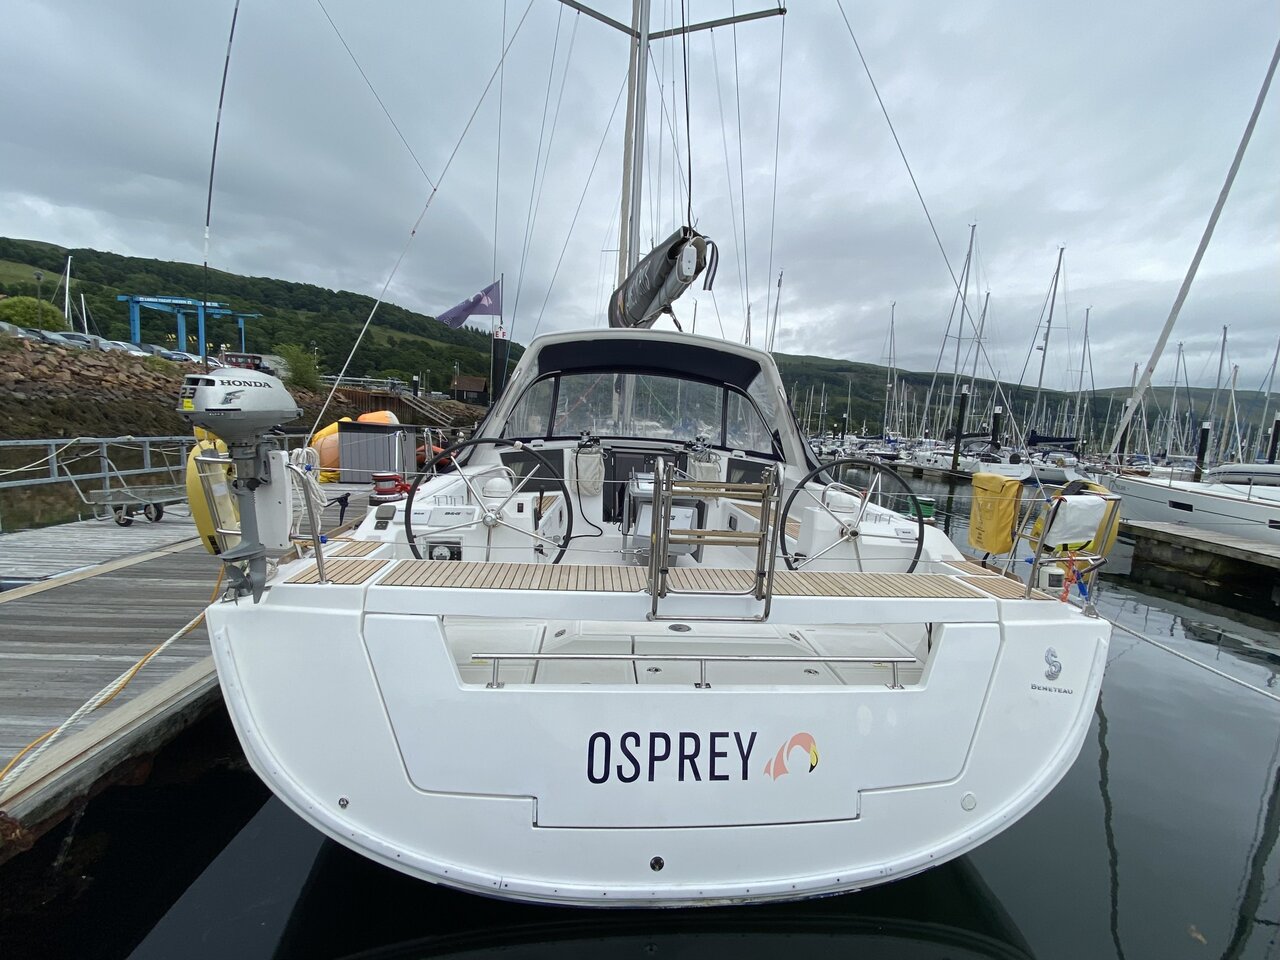 Oceanis 45 - 4 cab. - Yacht Charter United Kingdom & Boat hire in United Kingdom Scotland Firth of Clyde Largs Largs Yacht Haven 1